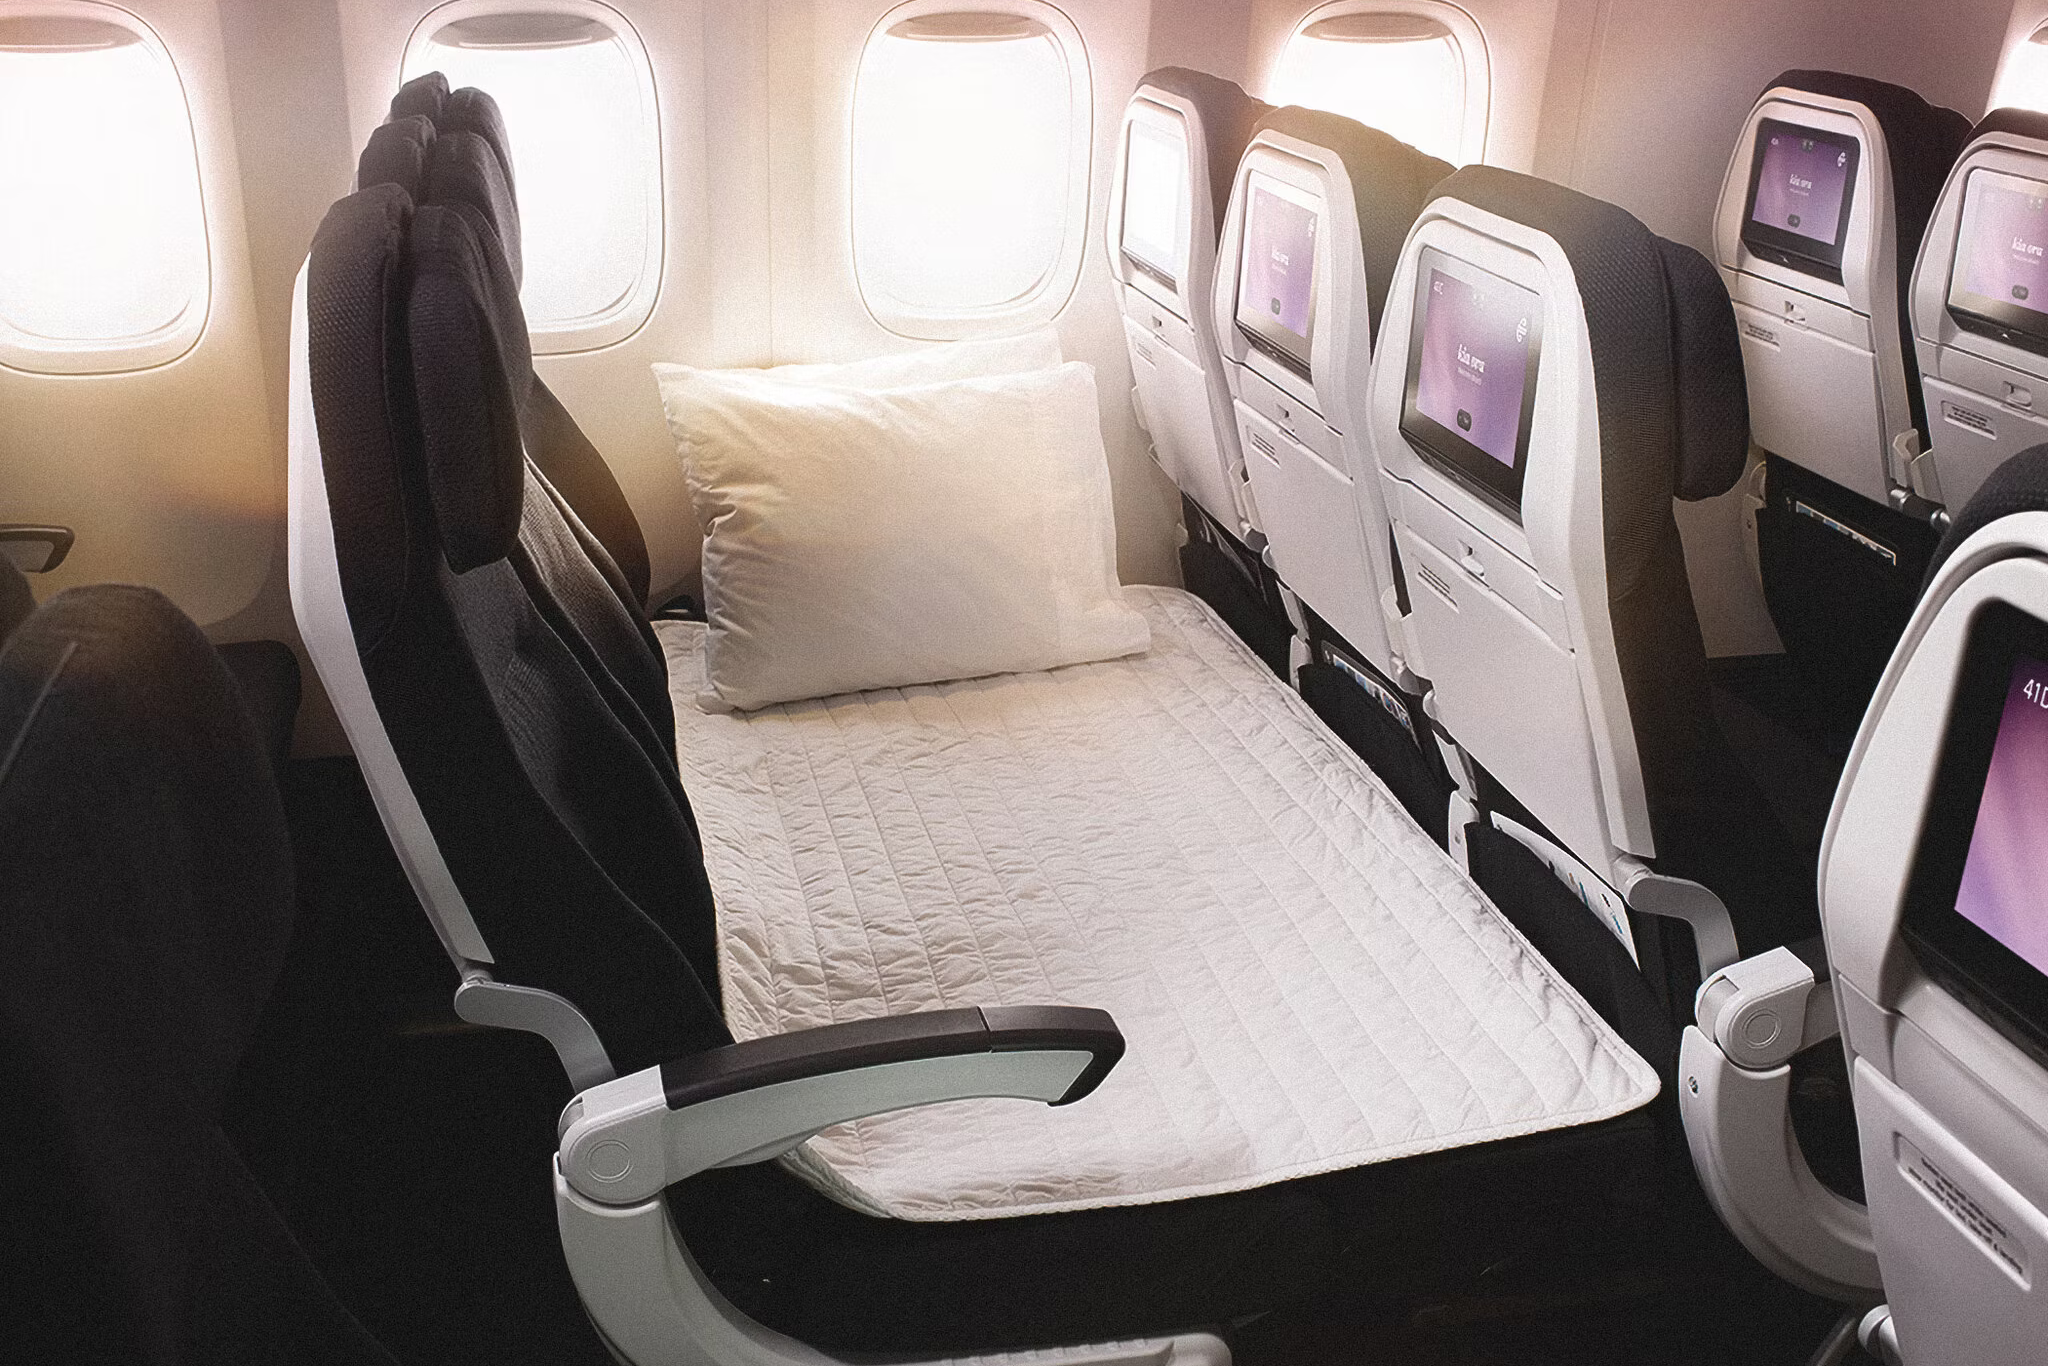 An Air New Zealand Skycouch set up for a passenger.